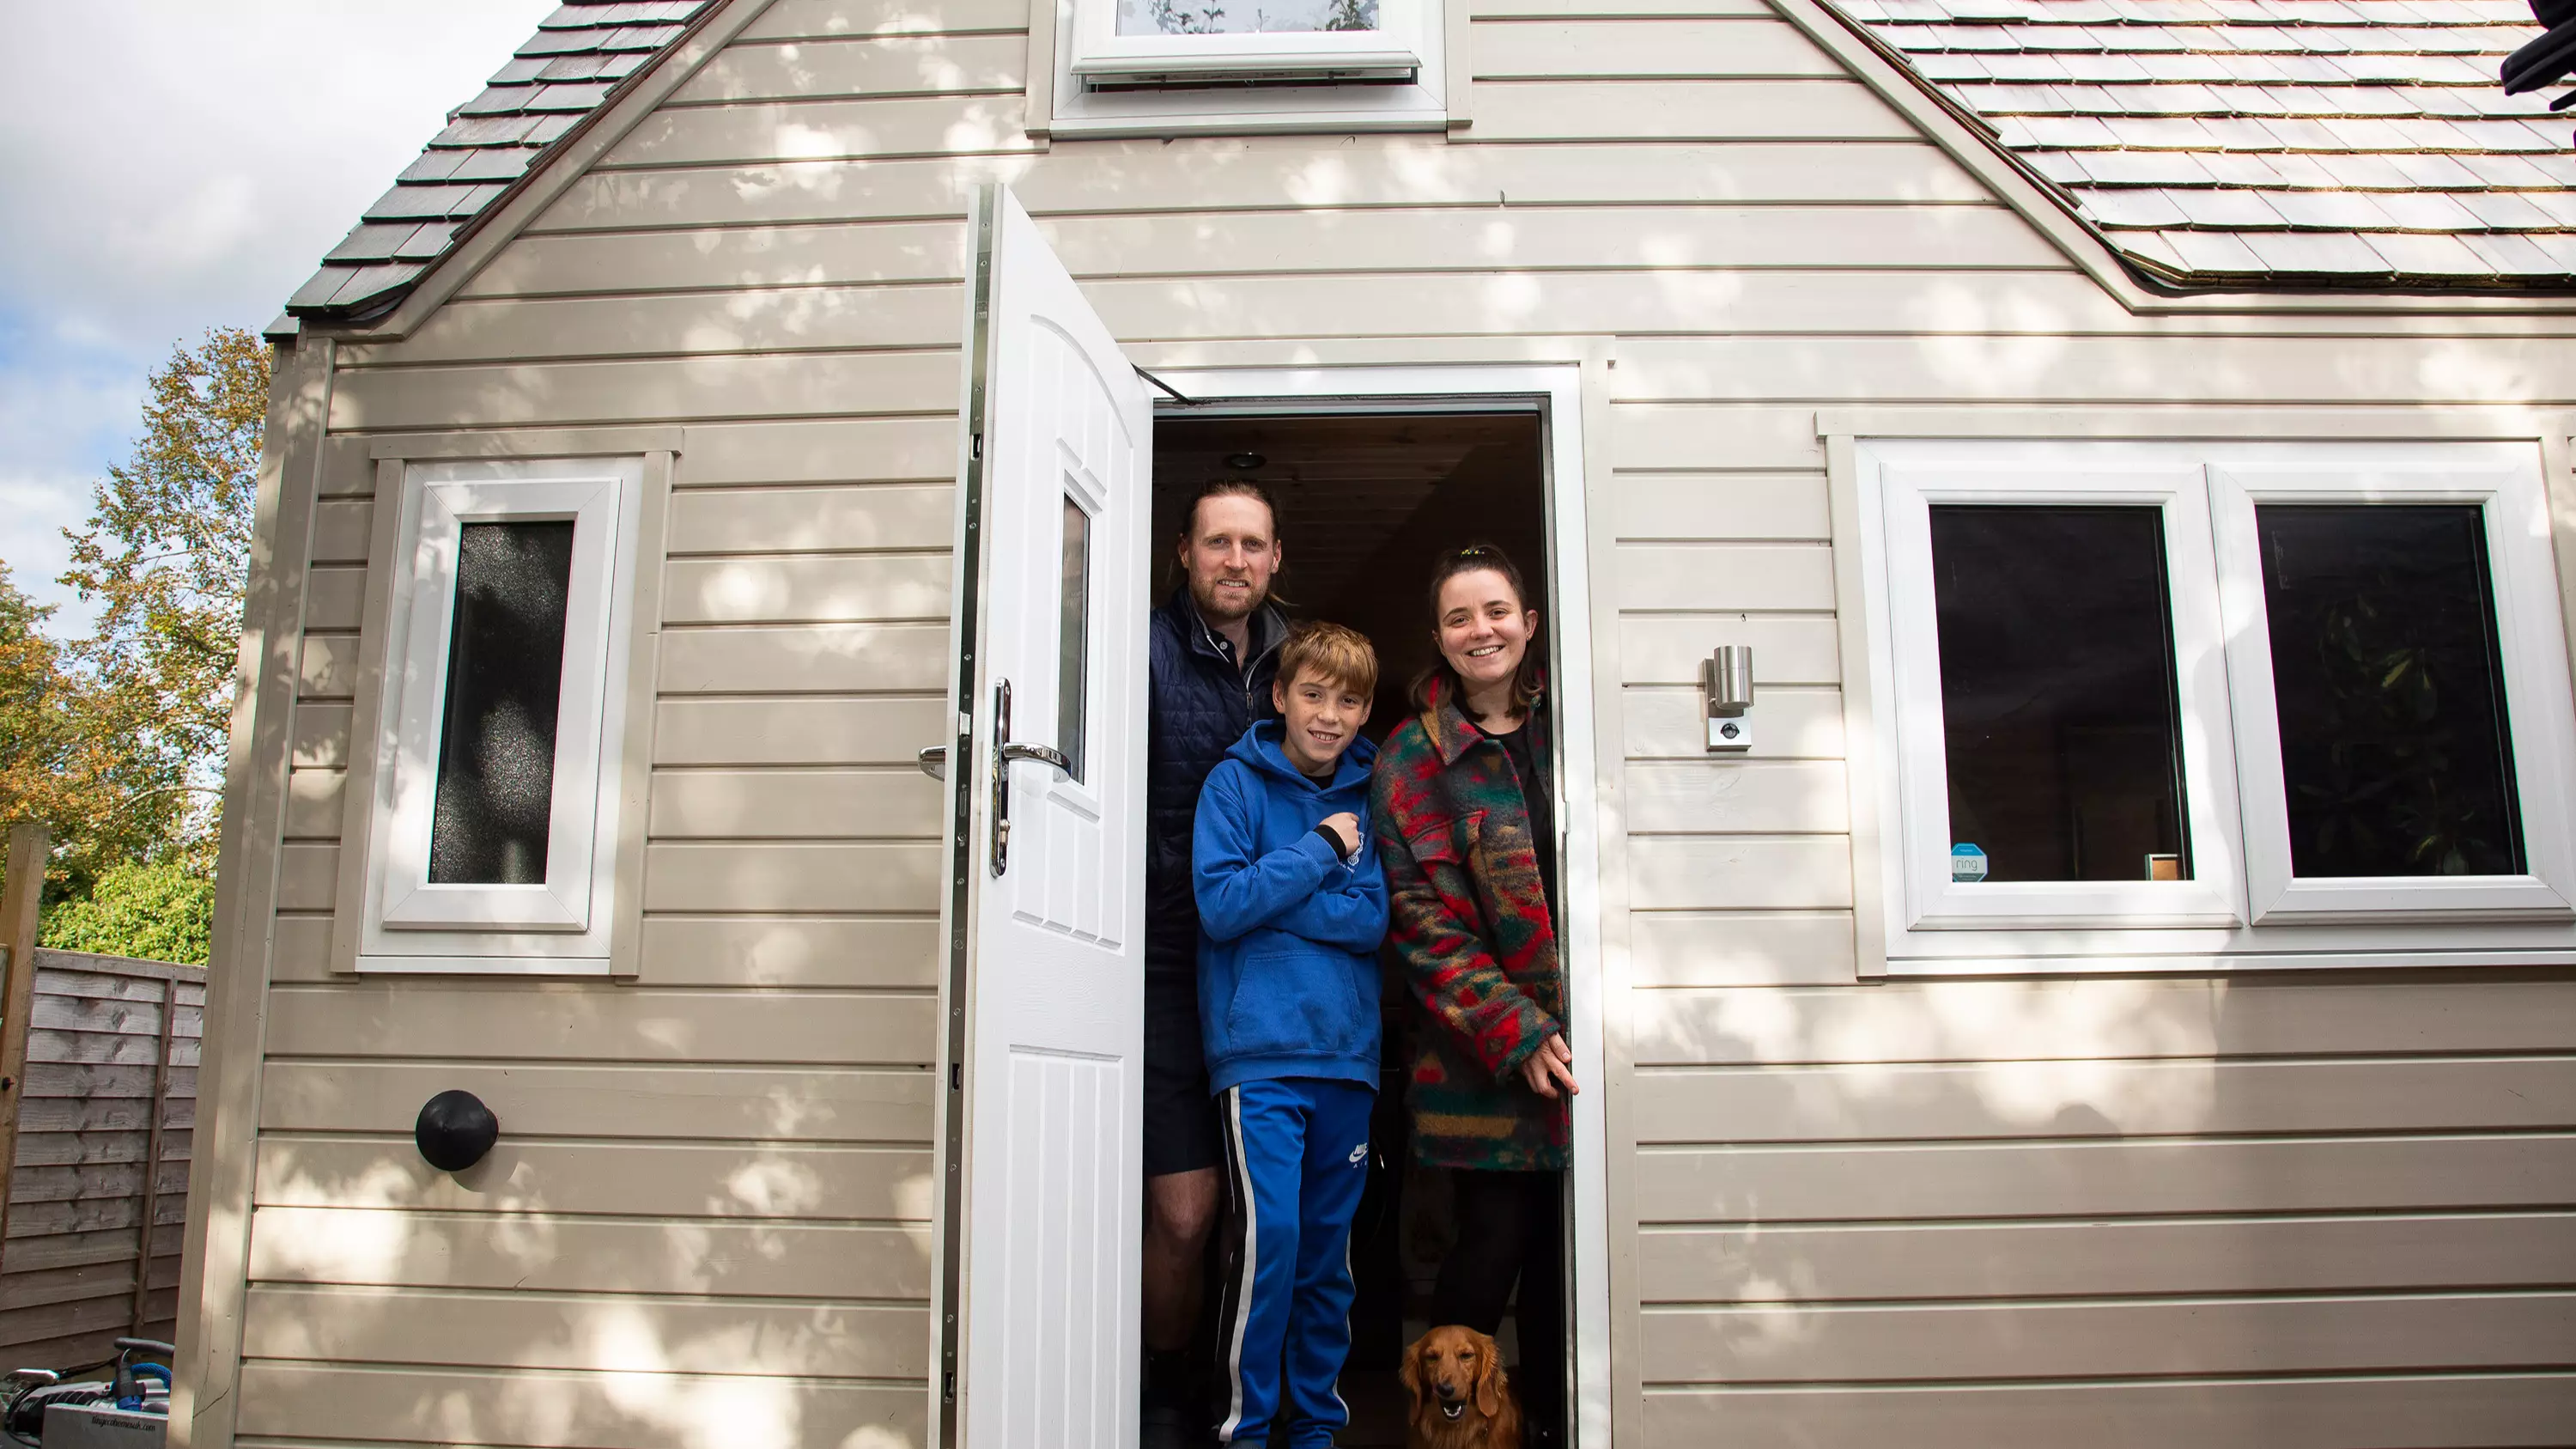 Family Move Into Tiny £50k Home That's So Small They Can't Stand Up Upstairs 